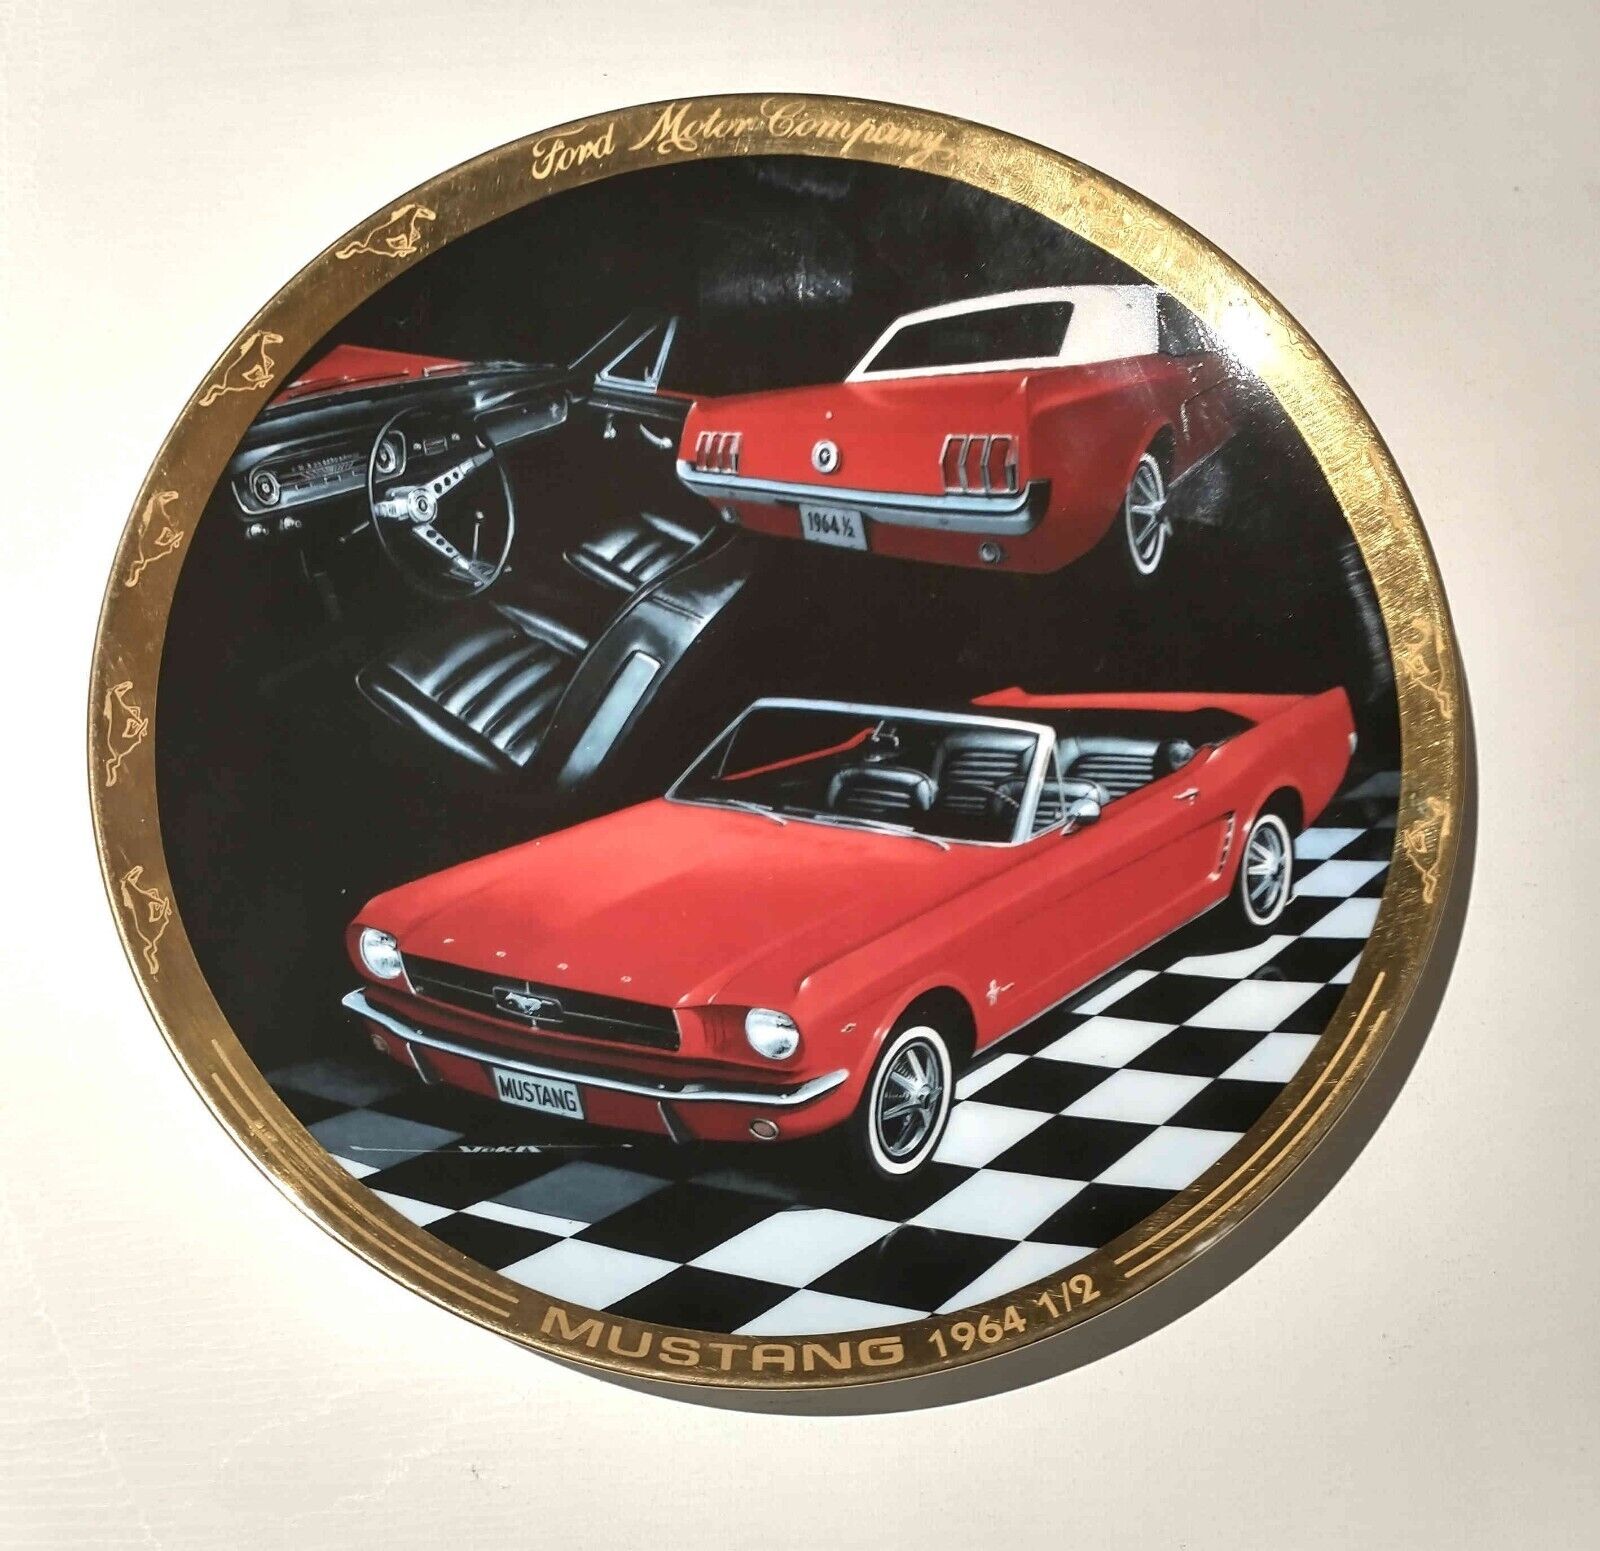 Ford Mustang 1964-1/2 Collector Plate #822 - 30th Anniversary By Stan Stokes